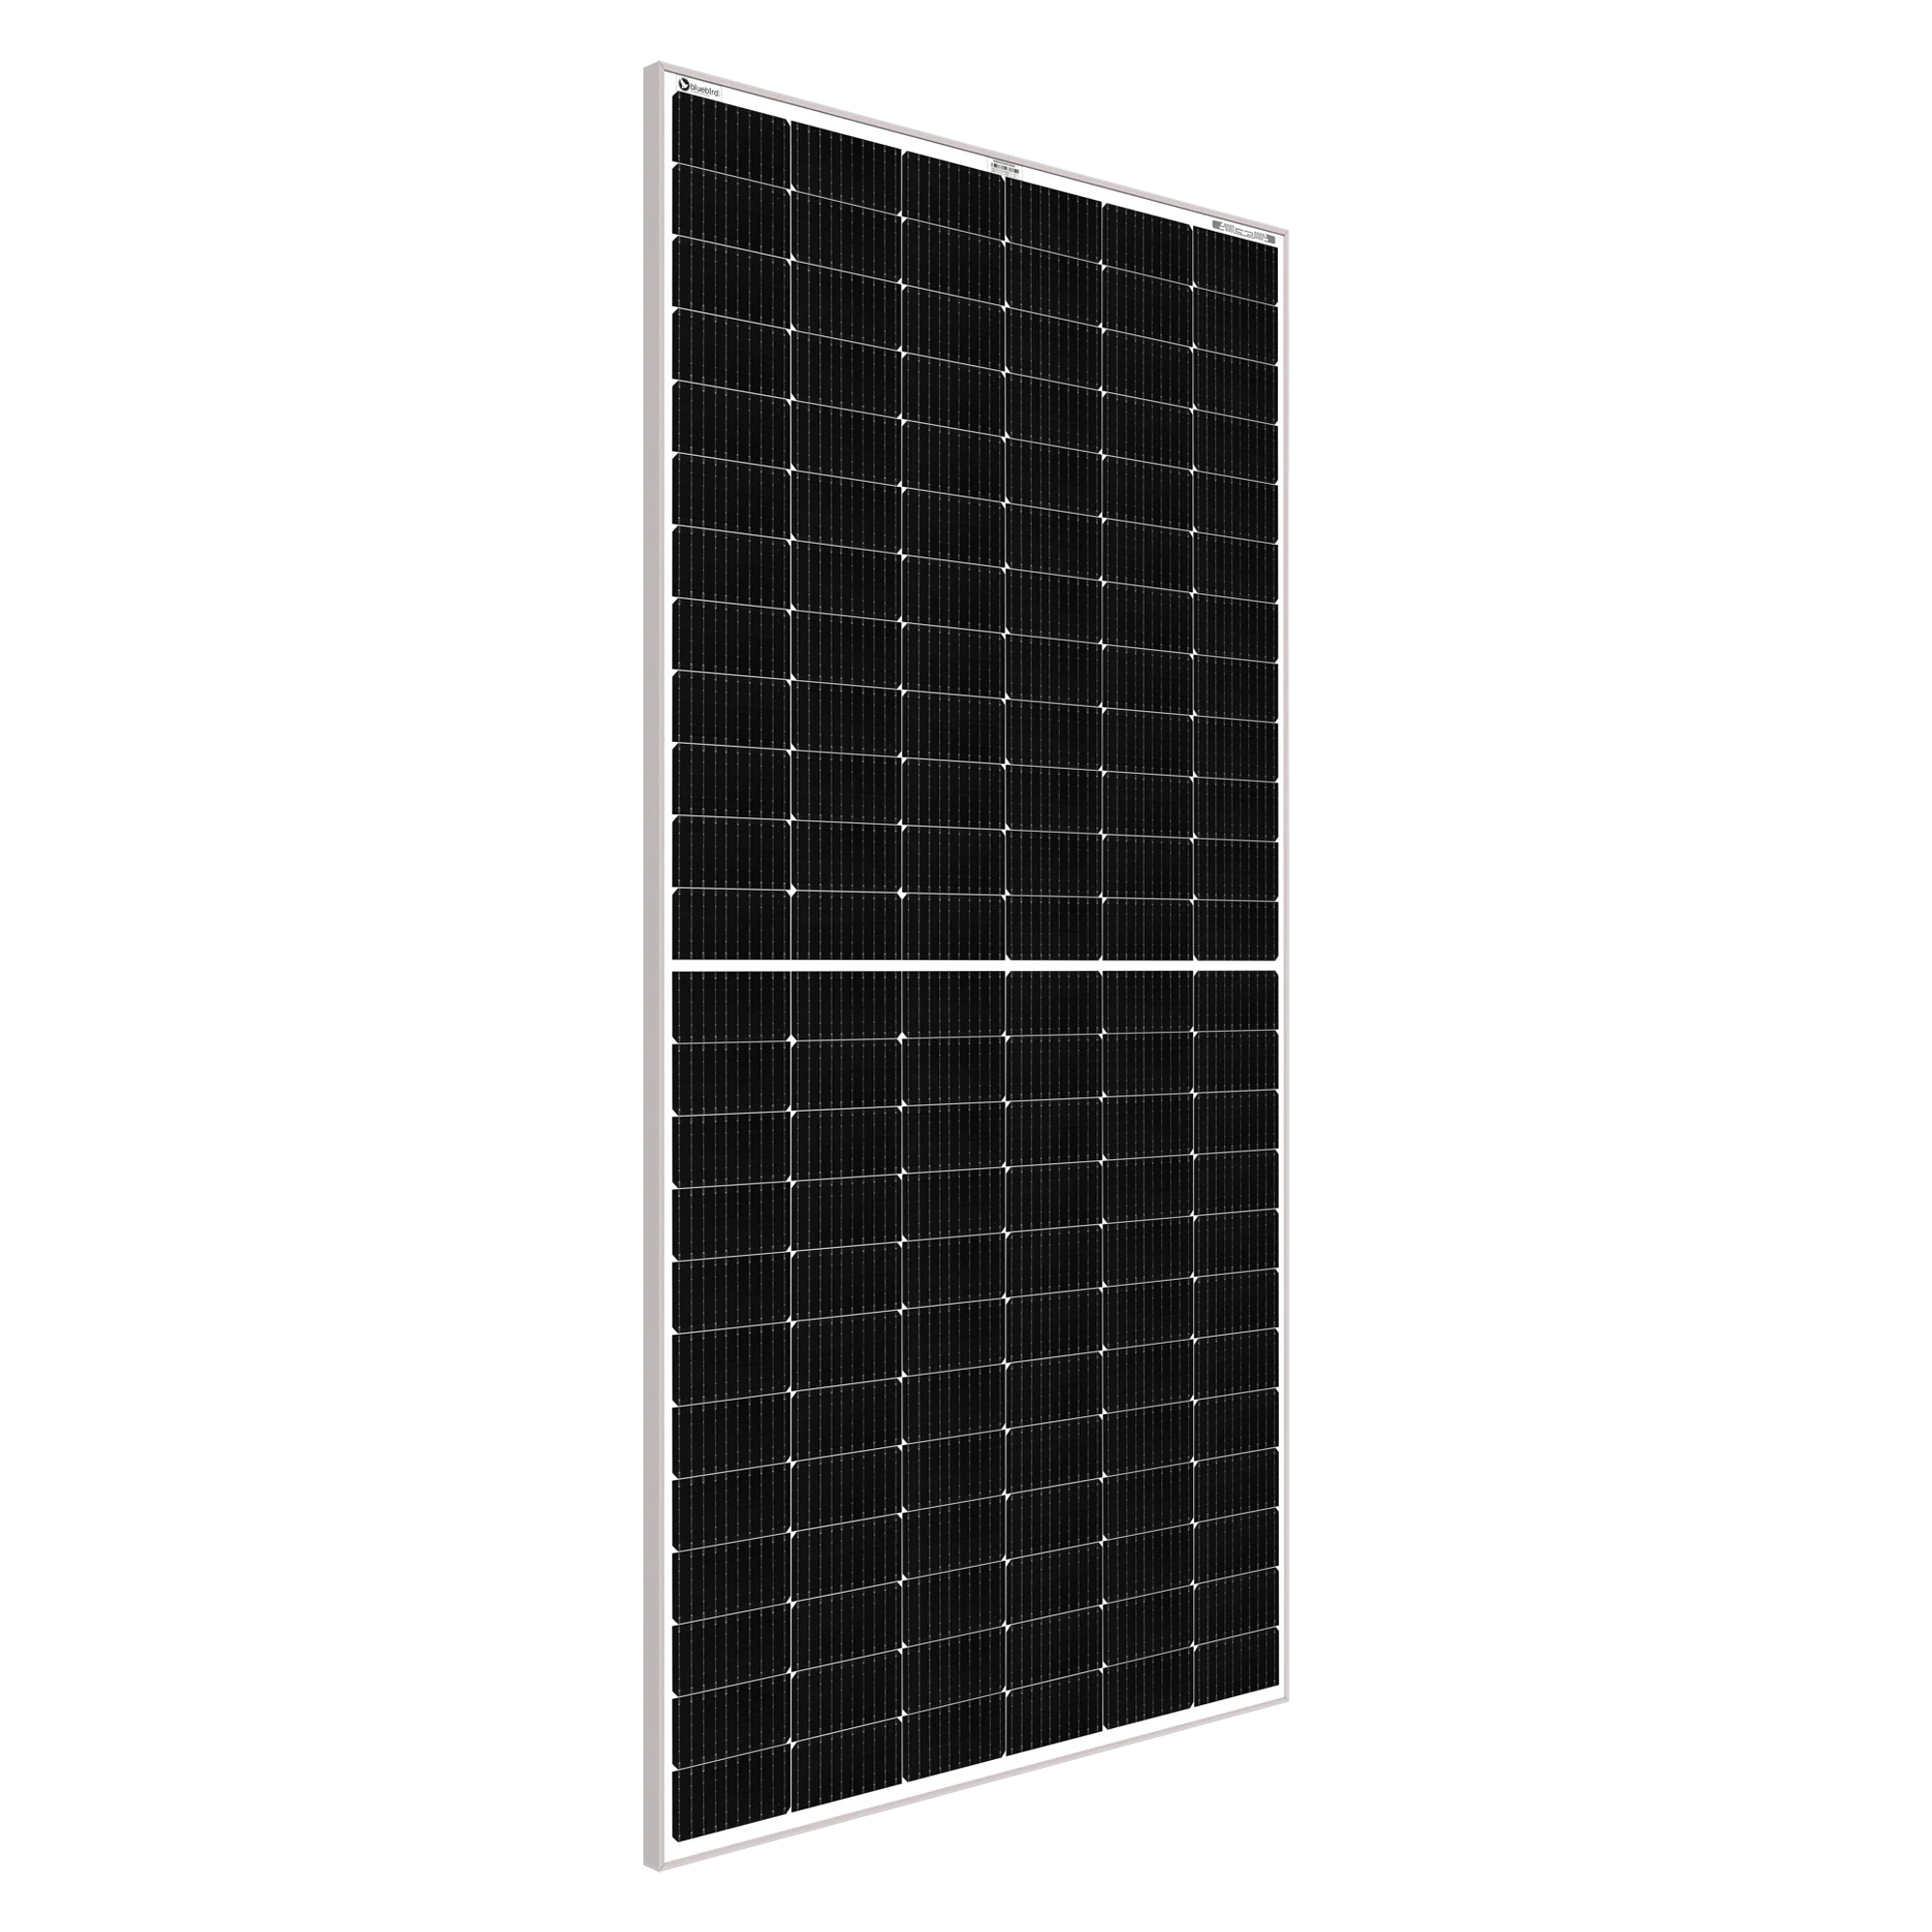 Solar panel High Efficiency 144 cells Mono Half-cut Solar Panel and is 540w 24v Black cover Waterproof Box Frame